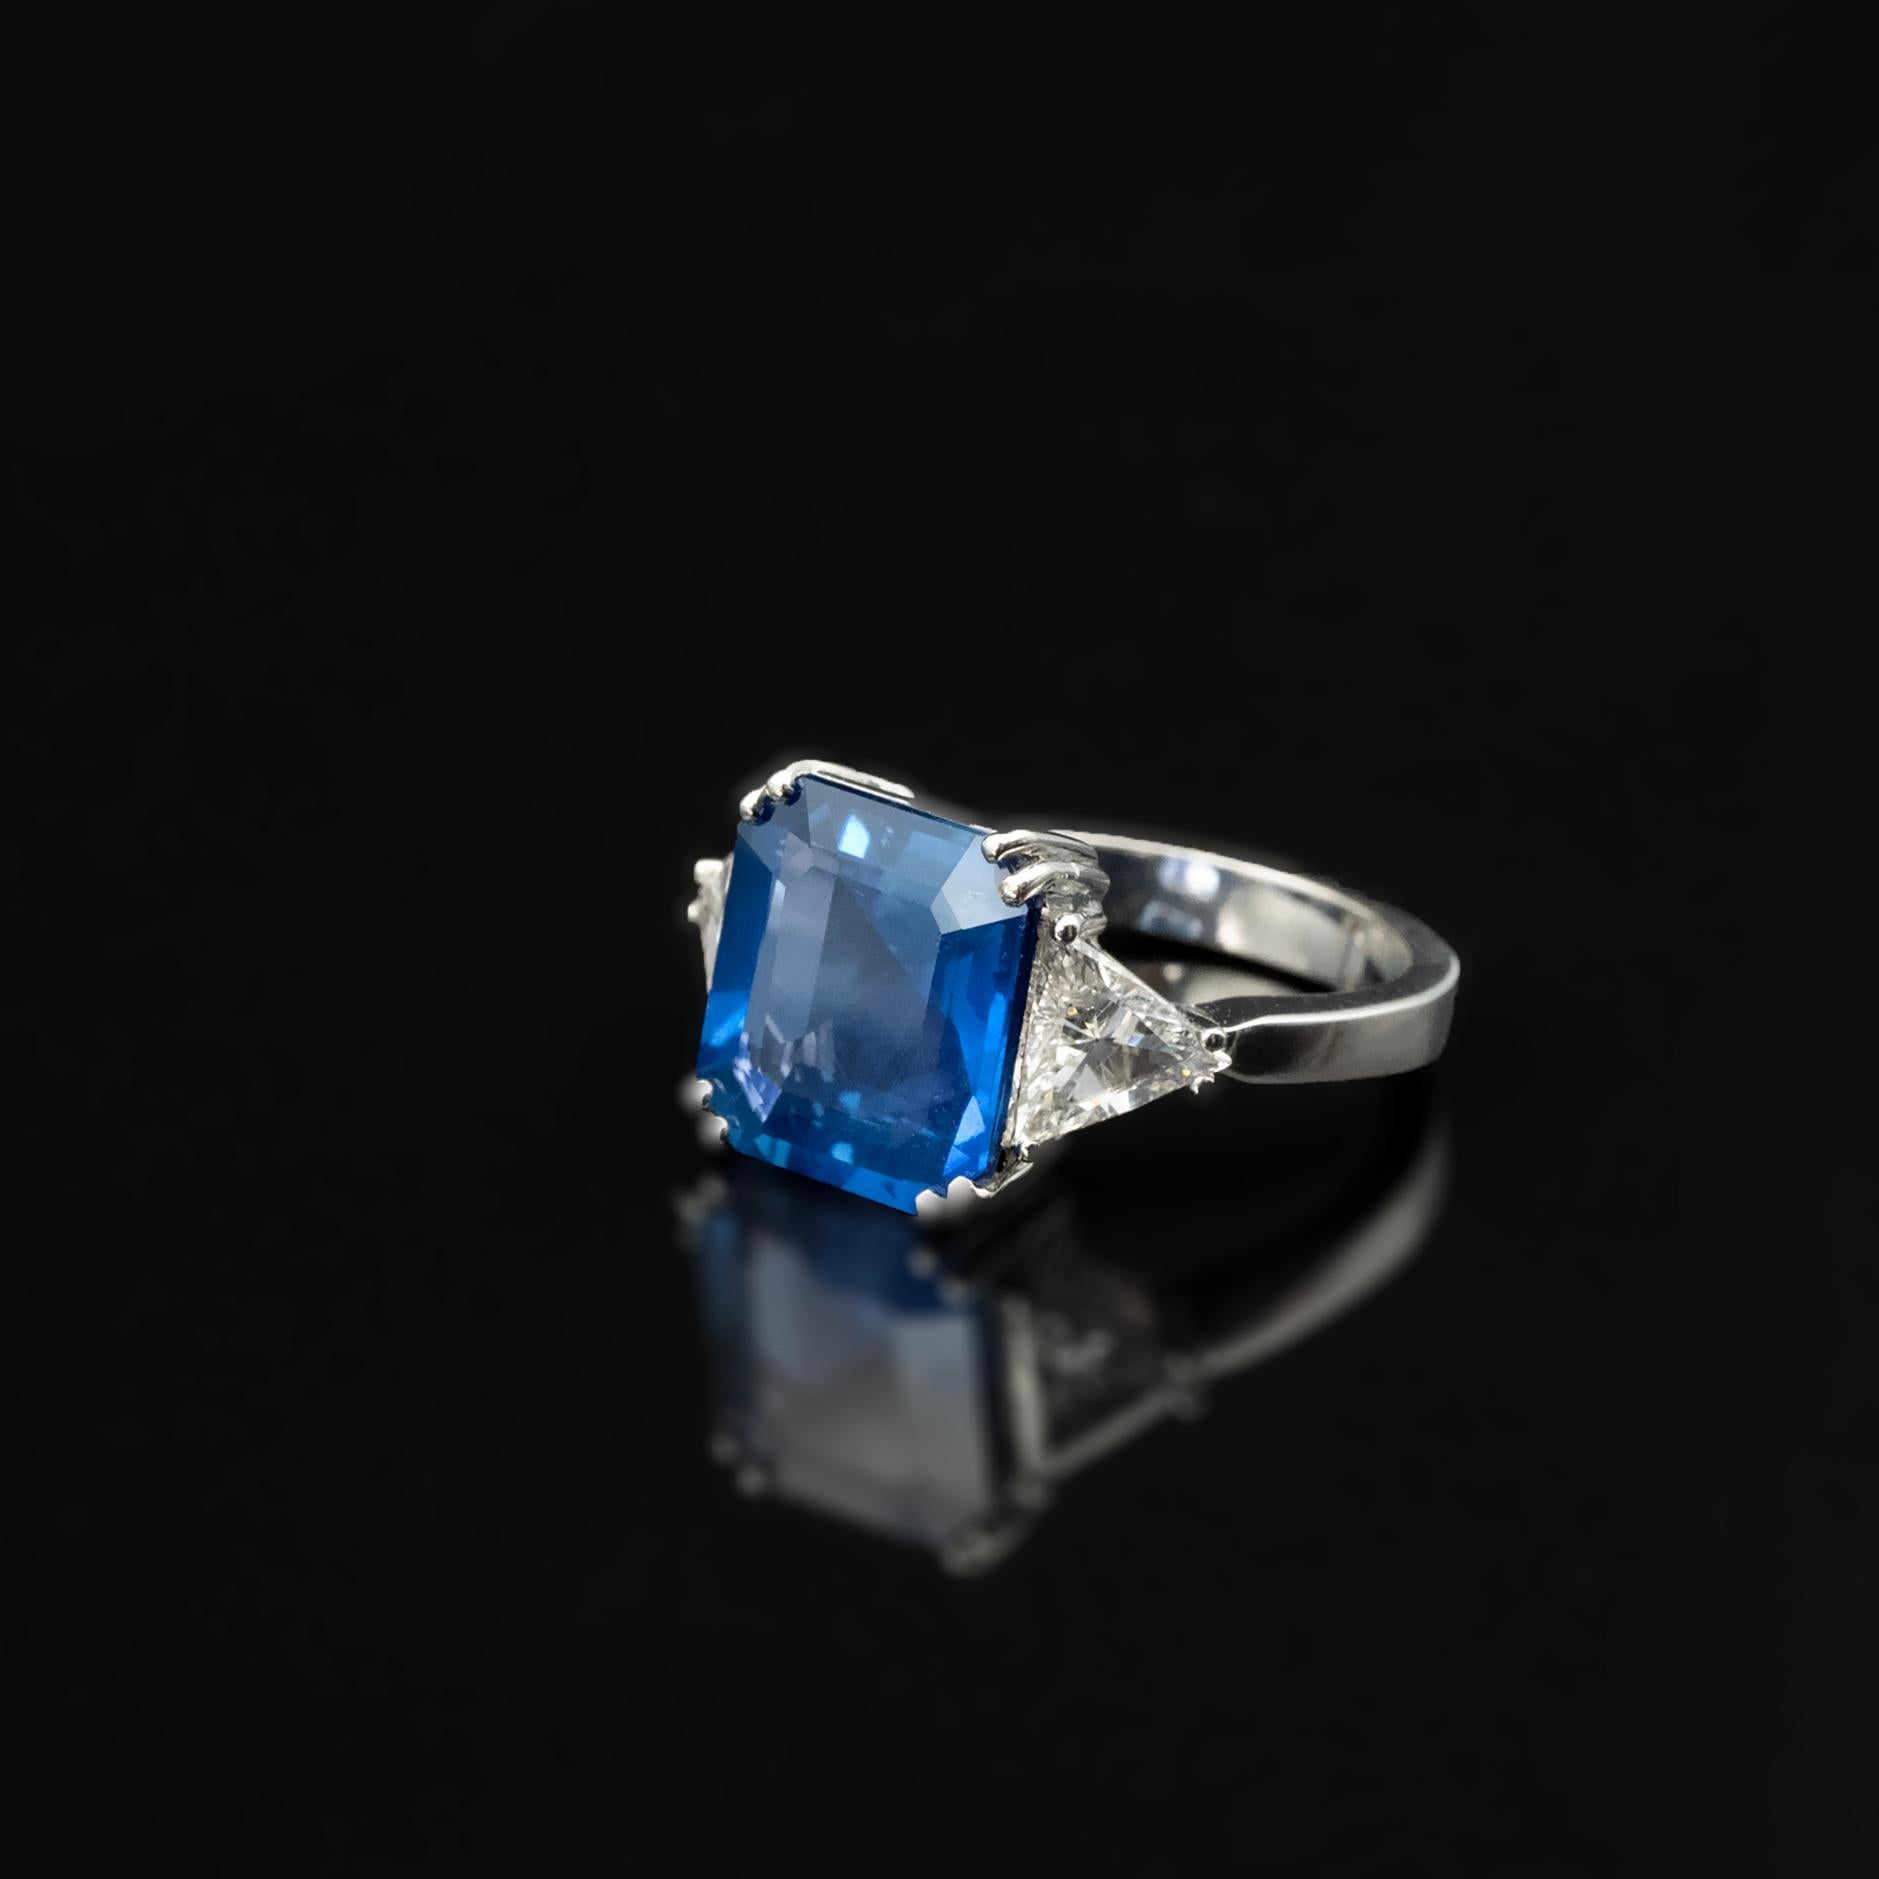 Contemporary Certified 5.77 carat octagonal Unheated Natural Sapphire Ring For Sale